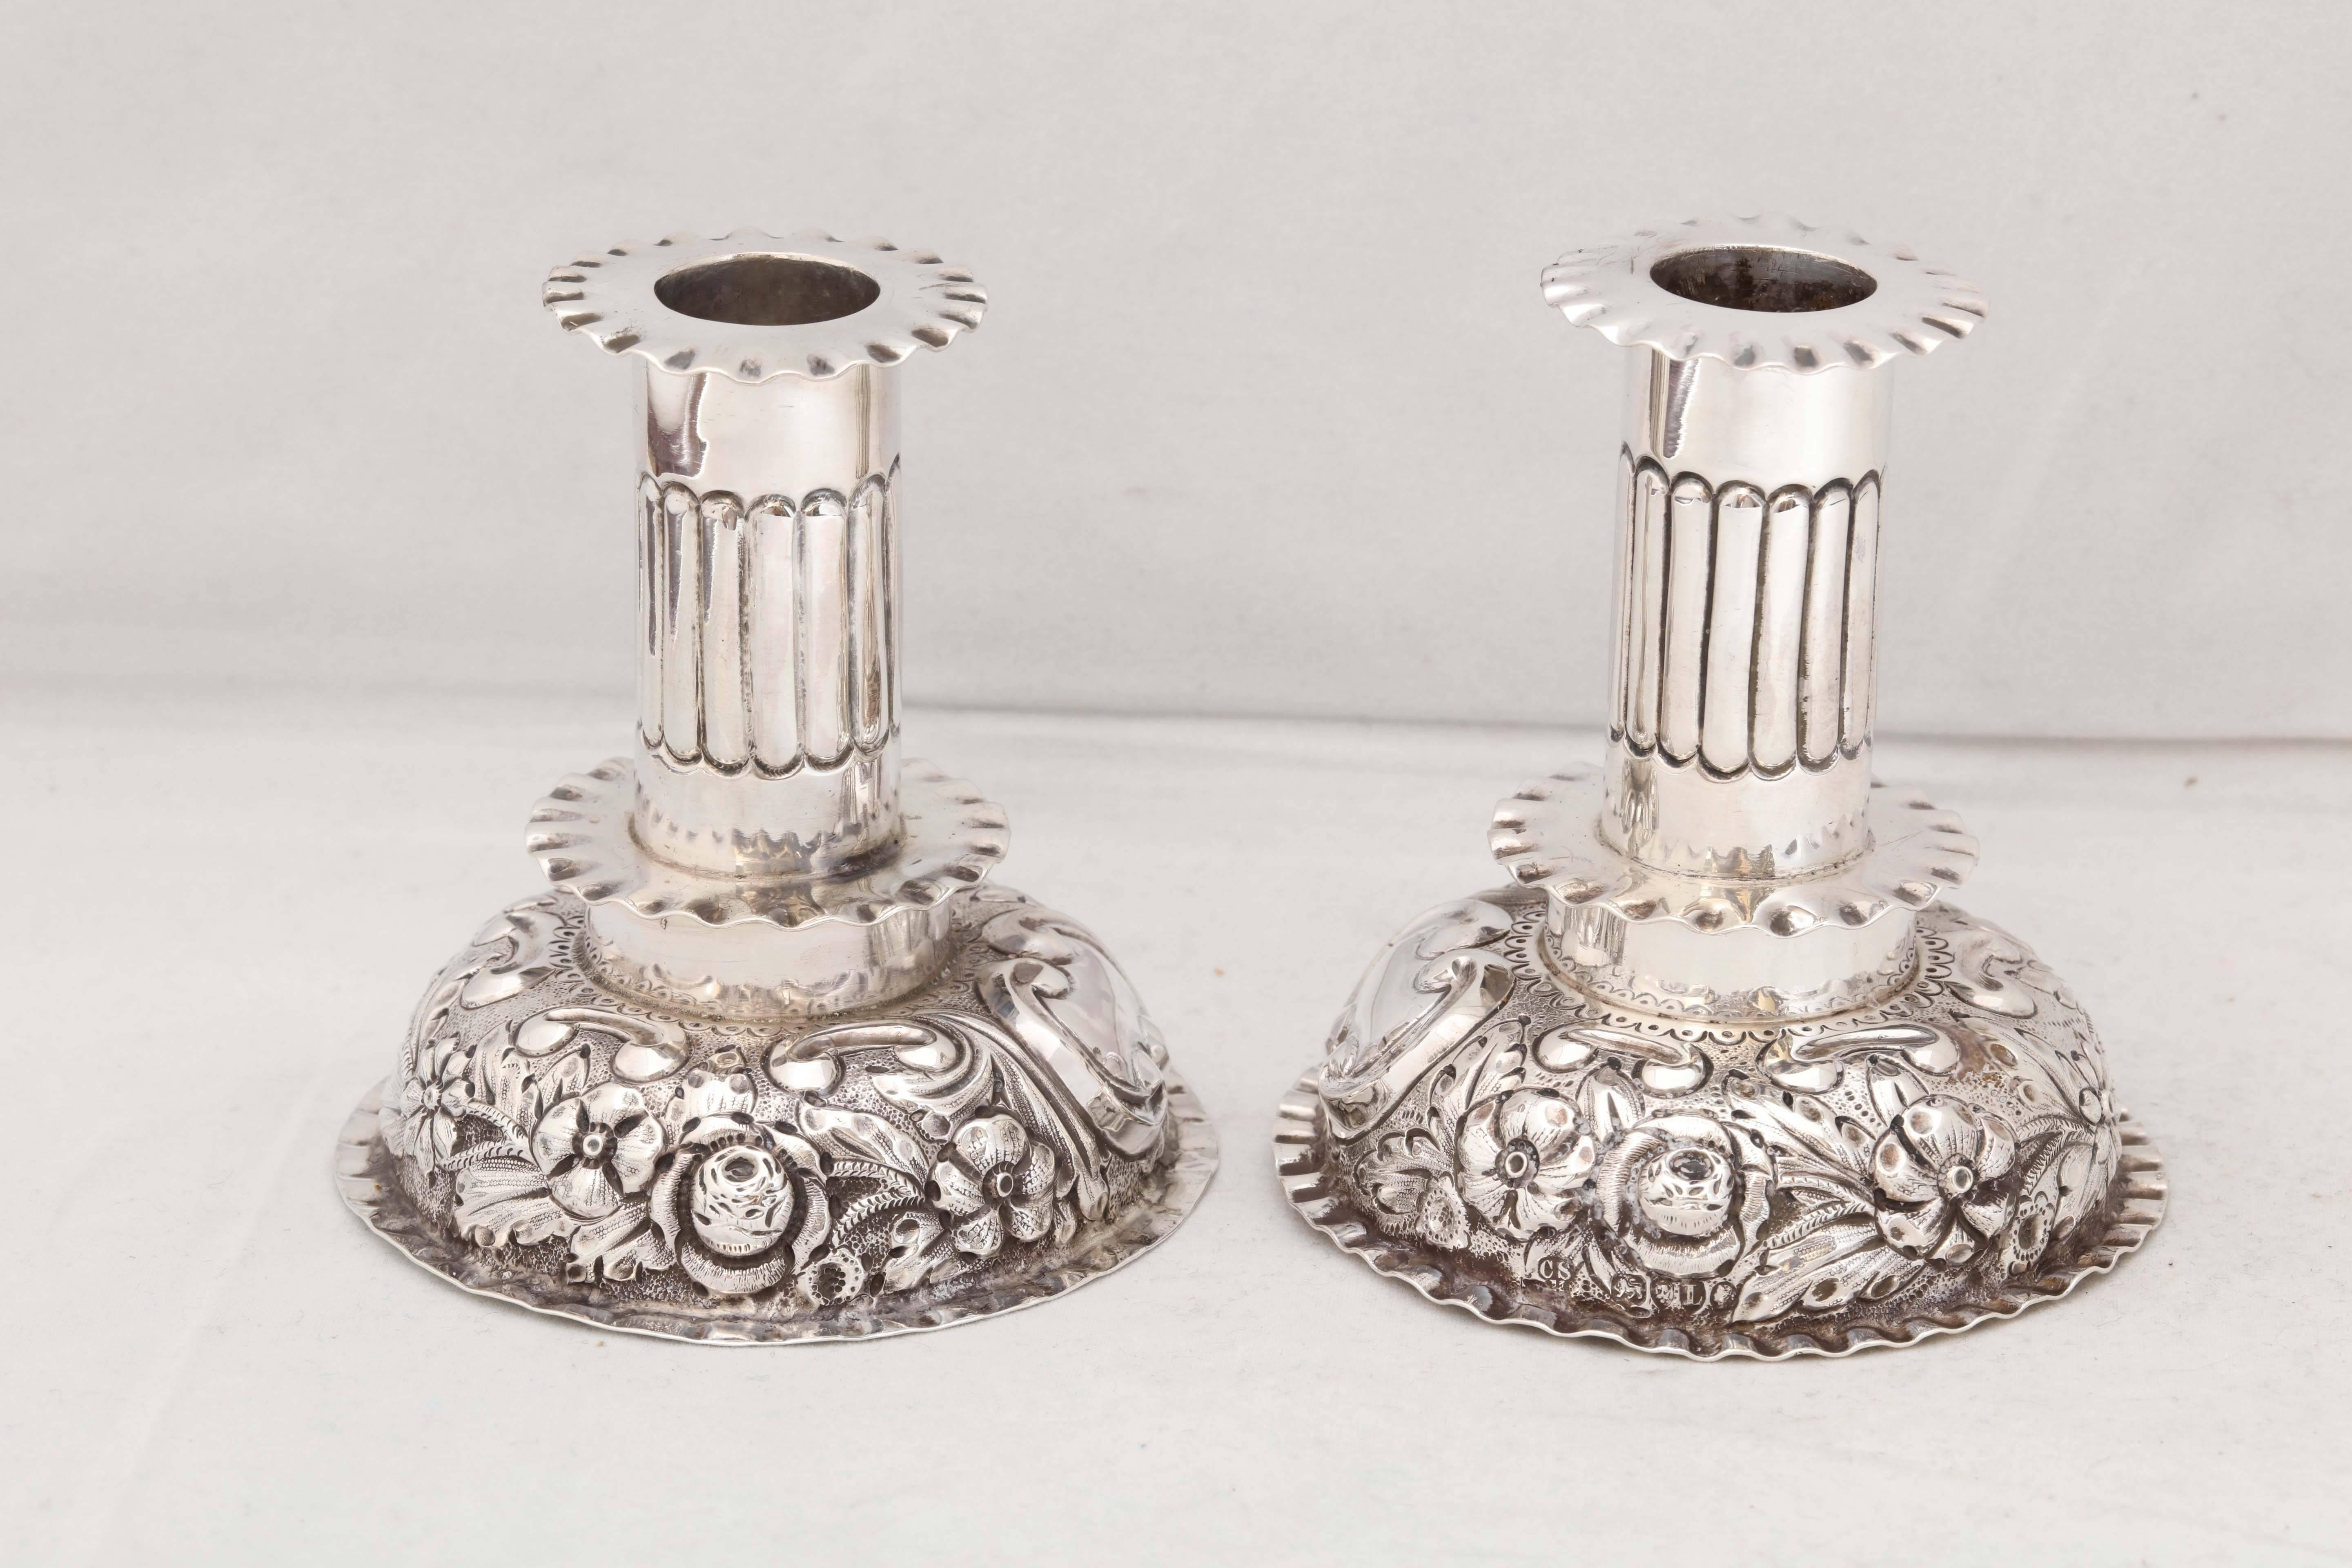 Pair of unusual, British, sterling silver, Victorian, Capstan candlesticks in the European style, London, 1886, Charles Stuart Harris - maker. Removable bobeches; vacant cartouche on each. Measures: 3 3/4